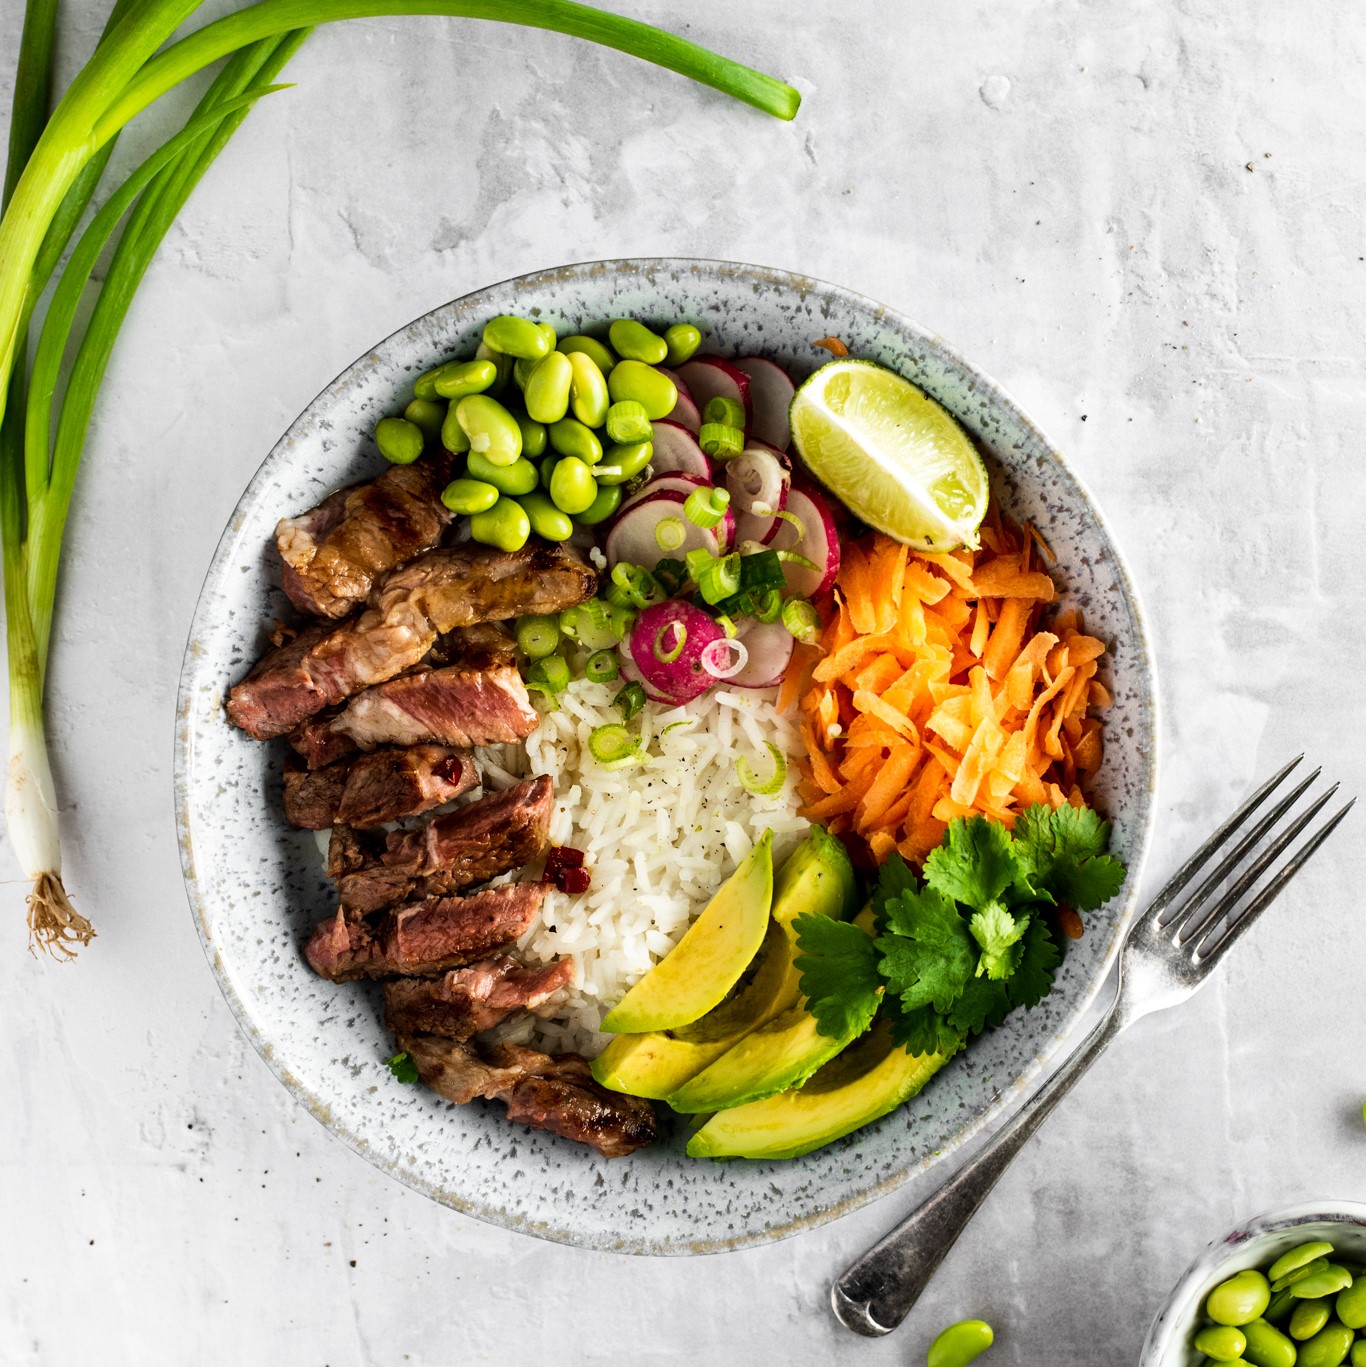 Gingered beef stir-fry with rice